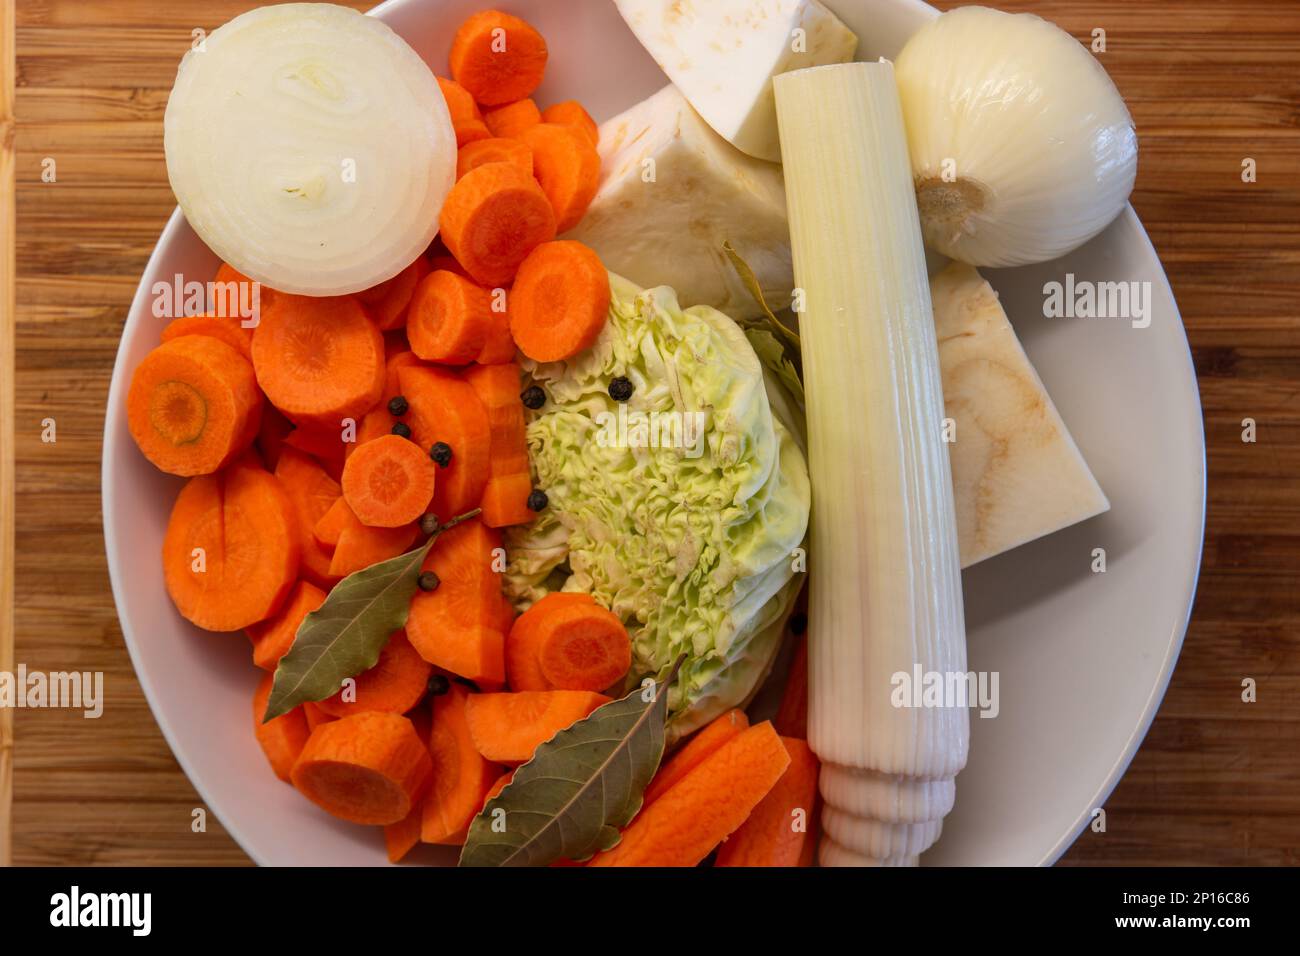 Soup stock vegetables ready cut in a plate top view. Stock Photo